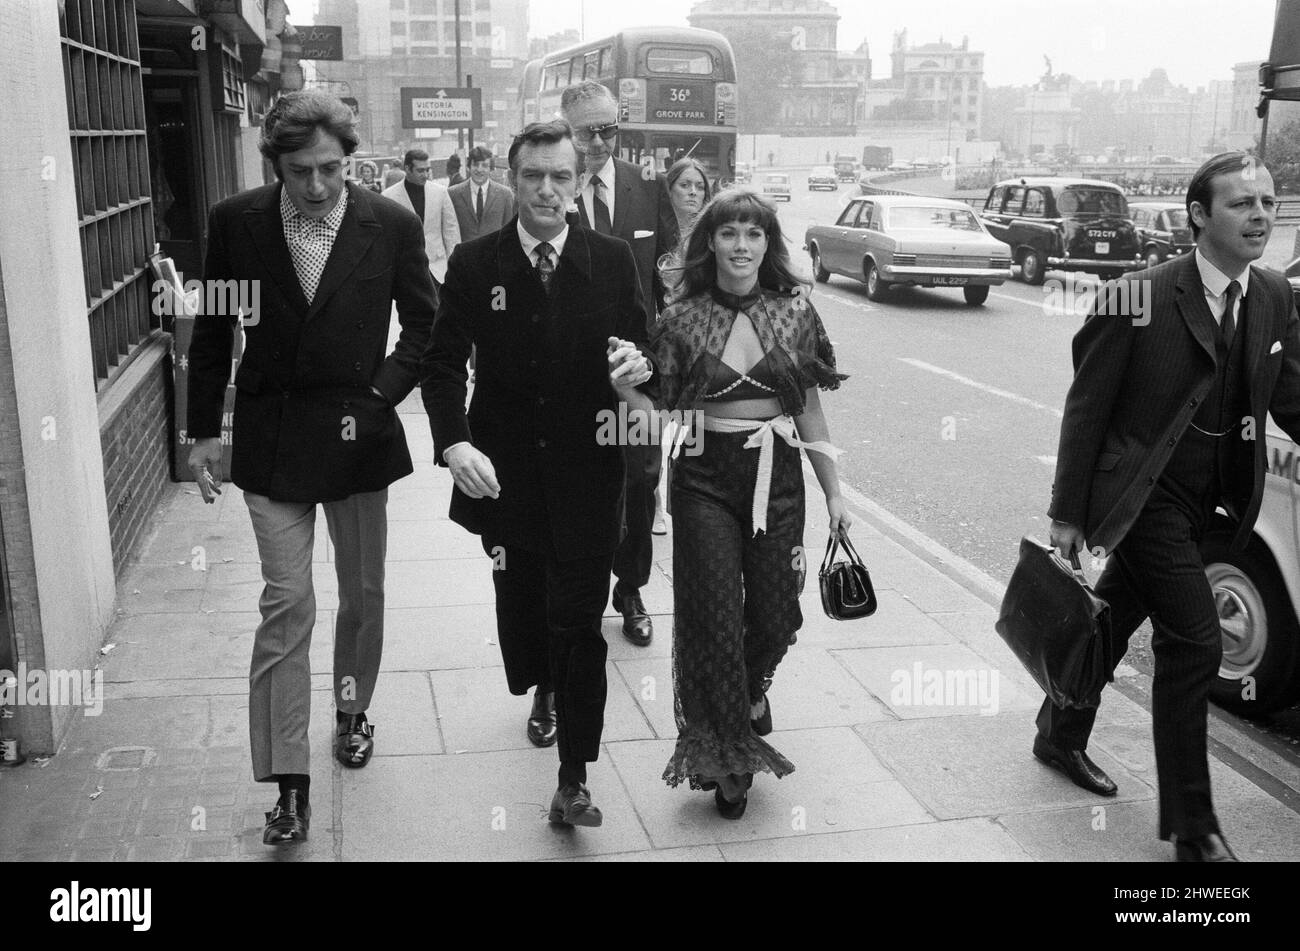 Hugh Hefner holds a press conference at the London Playboy Club to announce the formation of the Playboy film production company. Pictured as they arrive at the Playboy Club, Hugh Hefner with his girlfriend Barbara Benton, walking along Park Lane. 5th September 1969. Stock Photo